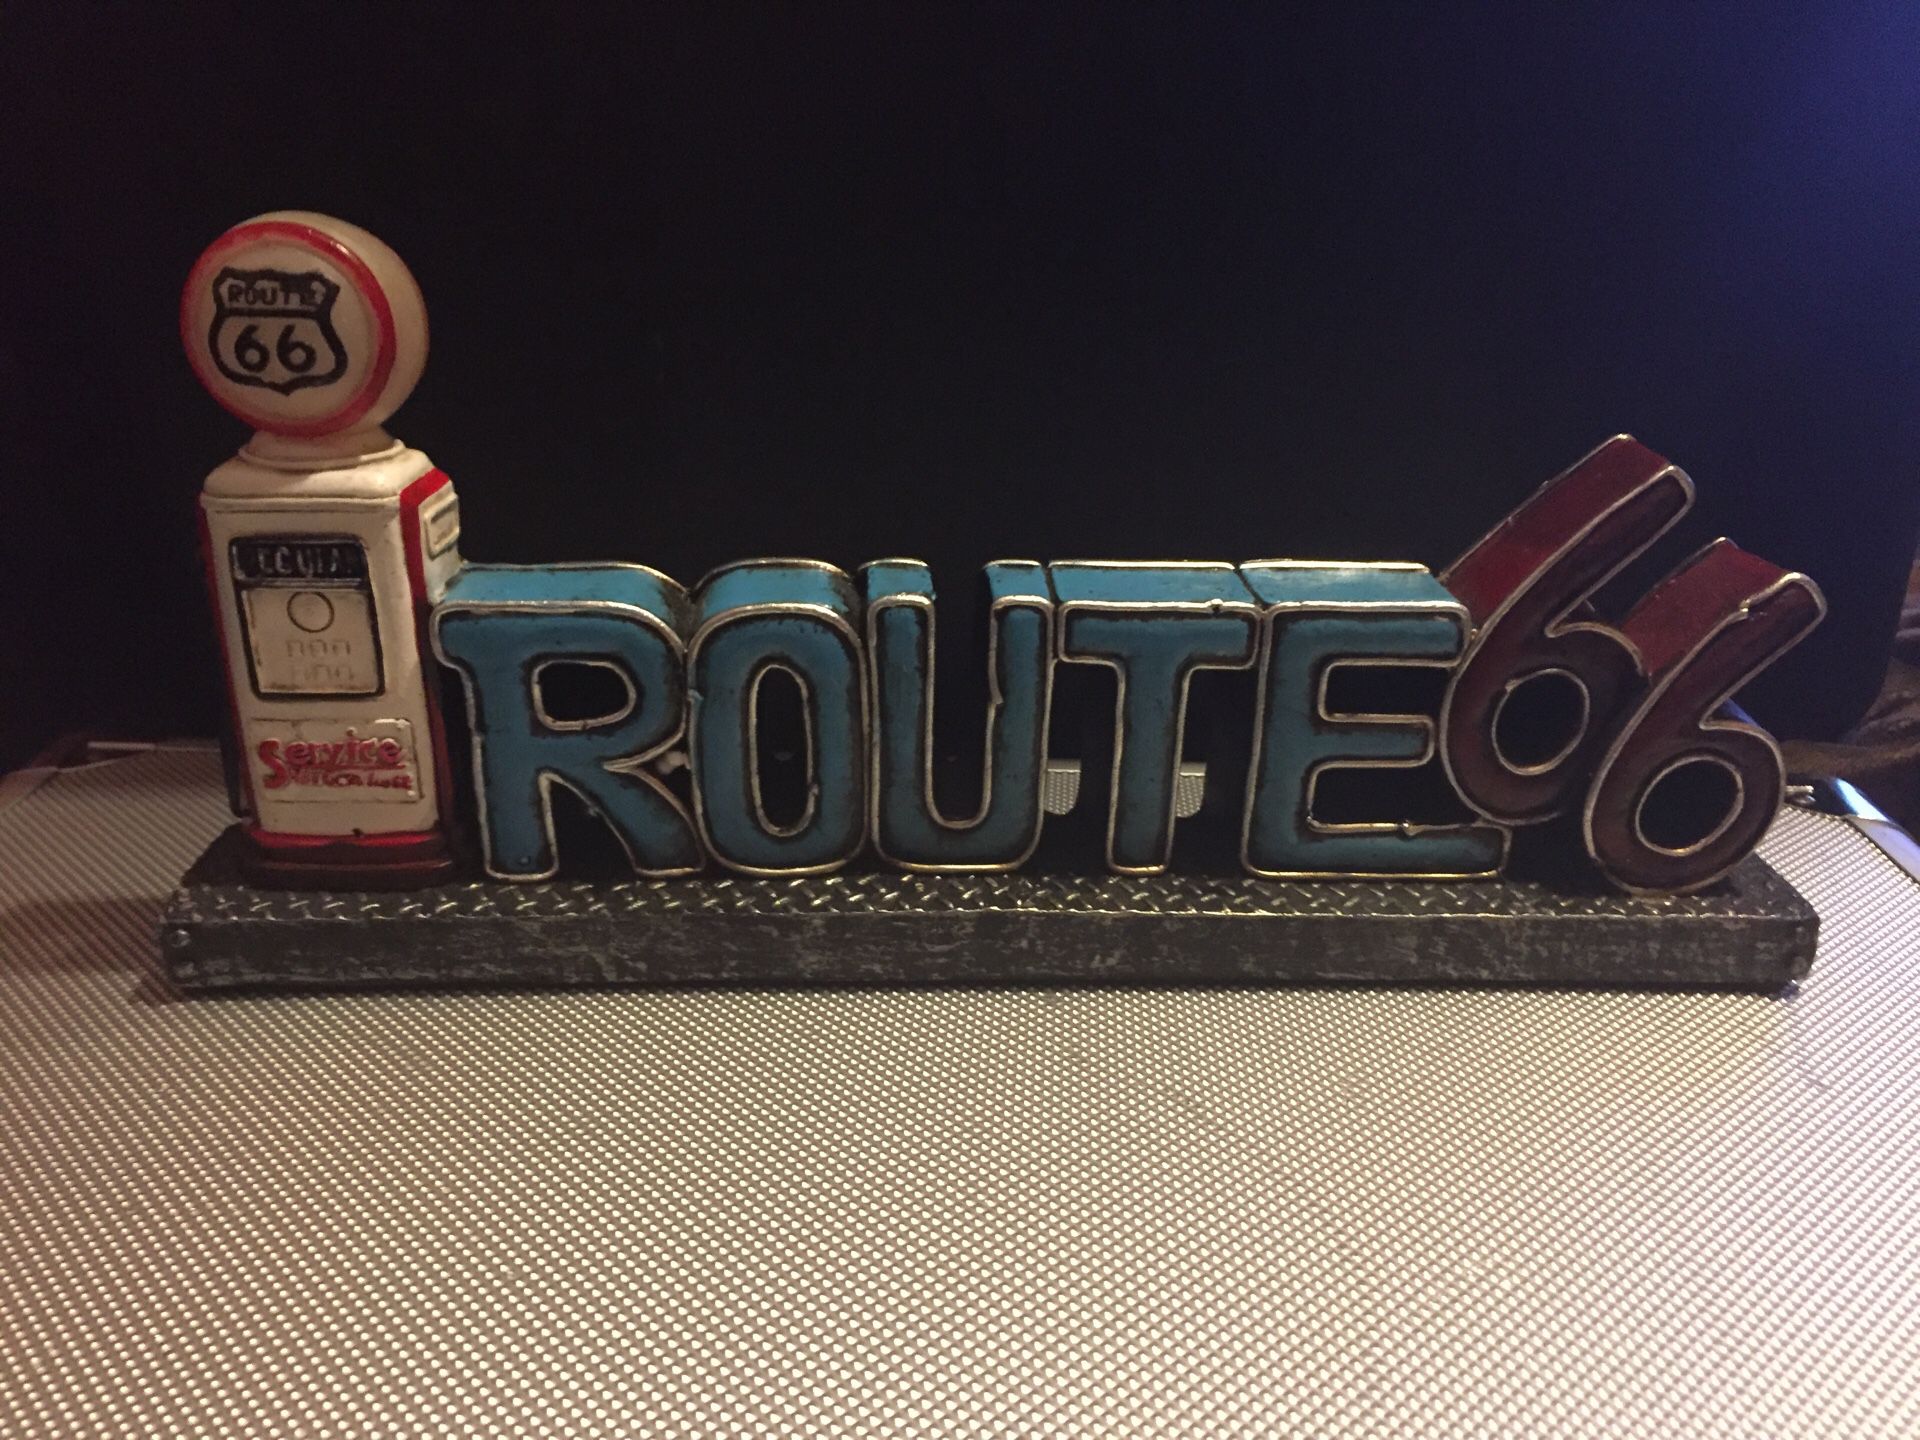 Route66 with gas pump led light